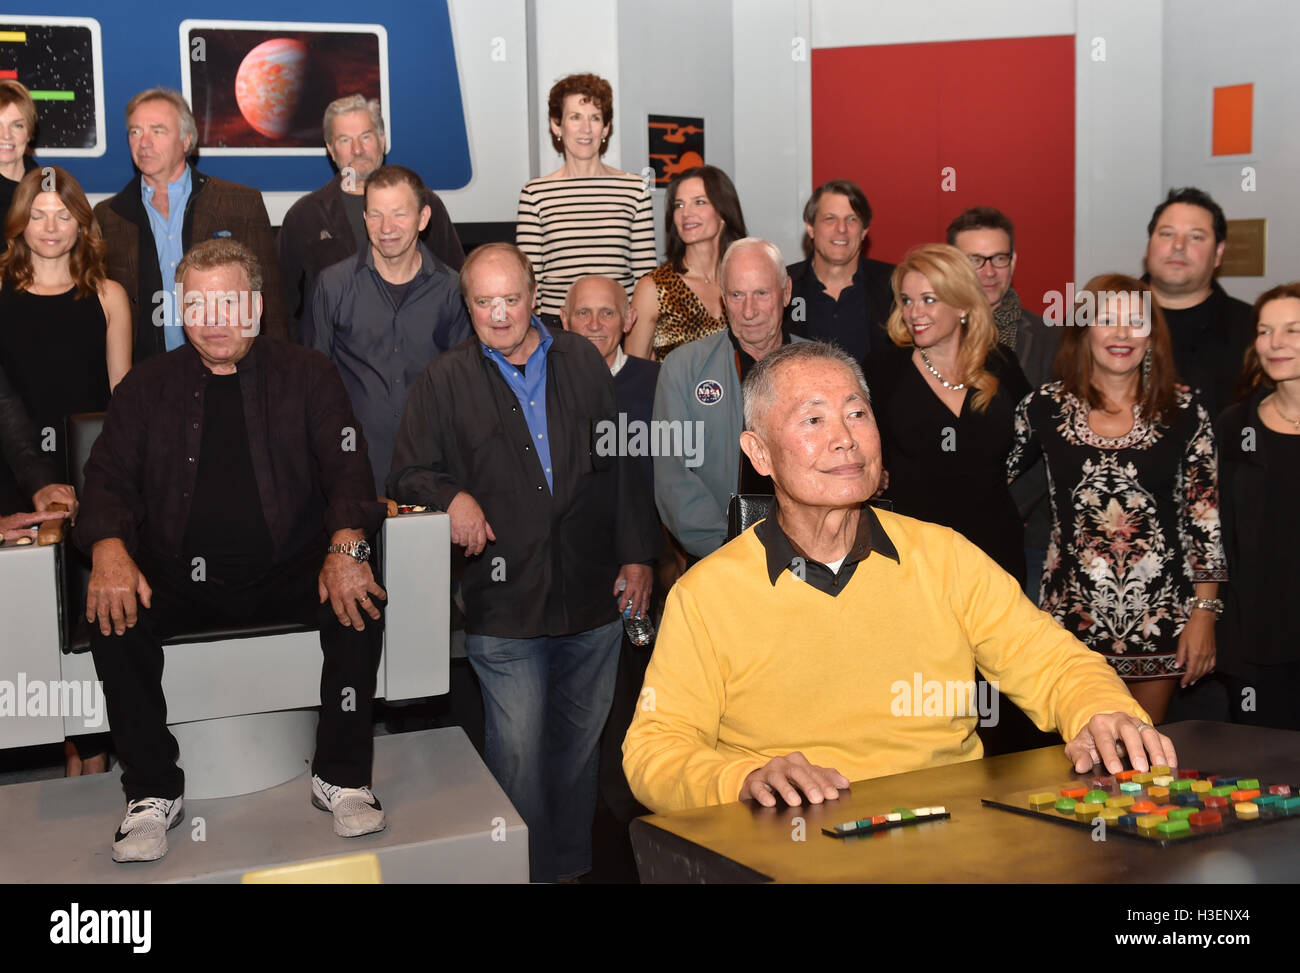 George Takei (right) and William Shatner (left), who played Hikaru Sulu and Captain Kirk respectively in the original Star Trek with other cast members from Star Trek franchise, during a photocall to launch Destination Star Trek Europe at The NEC in Birmingham. Stock Photo